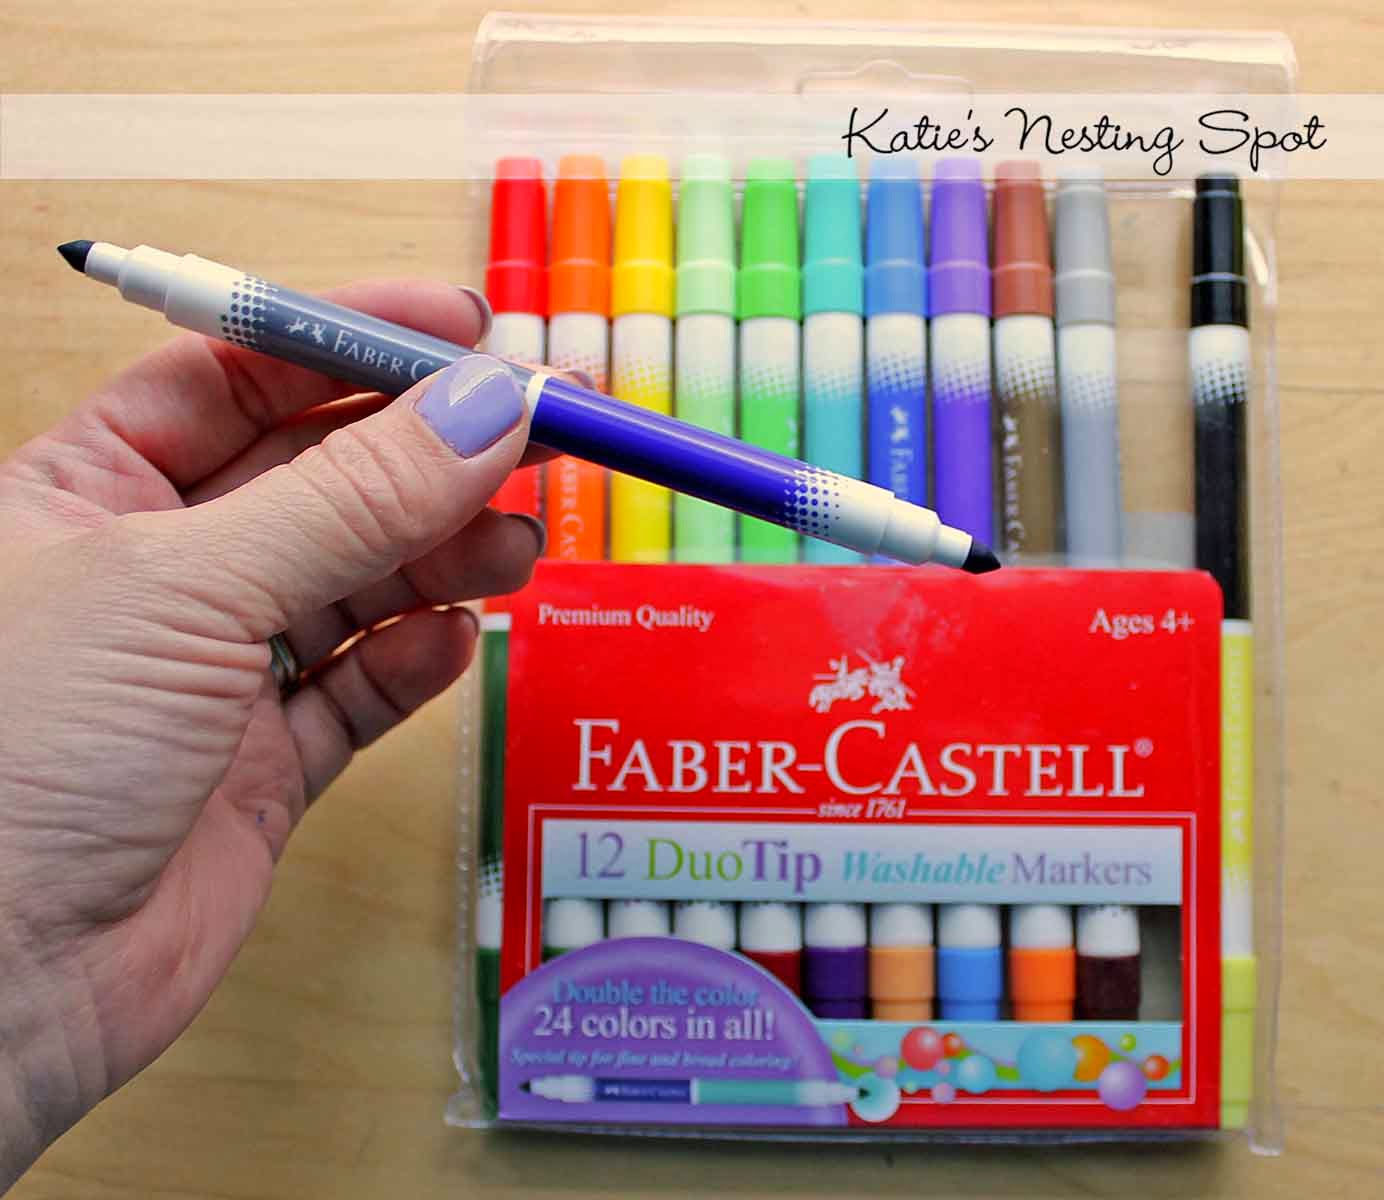 Faber-Castell Red Label DuoTip Washable Marker Set of 12 - Wet Paint  Artists' Materials and Framing